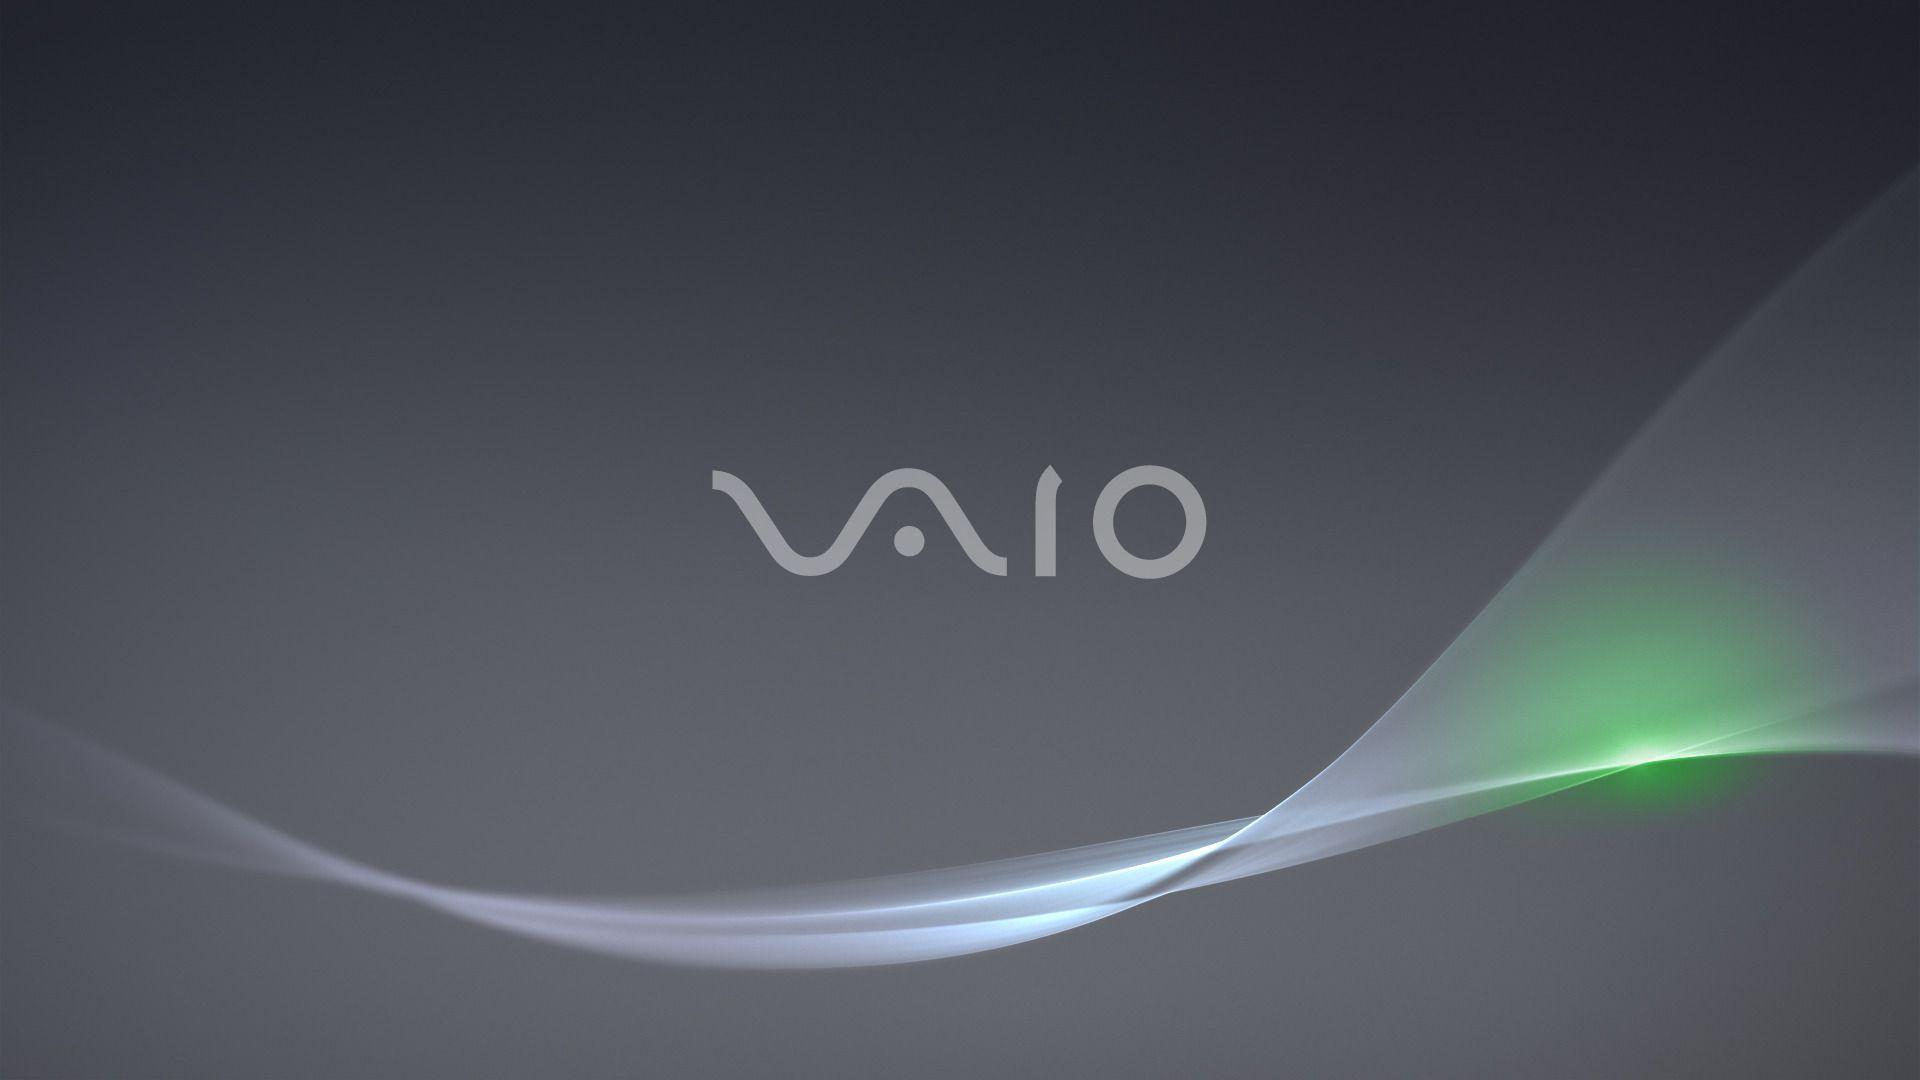 Sony Vaio HD Wallpapers - Top Free Sony Vaio HD Backgrounds ...